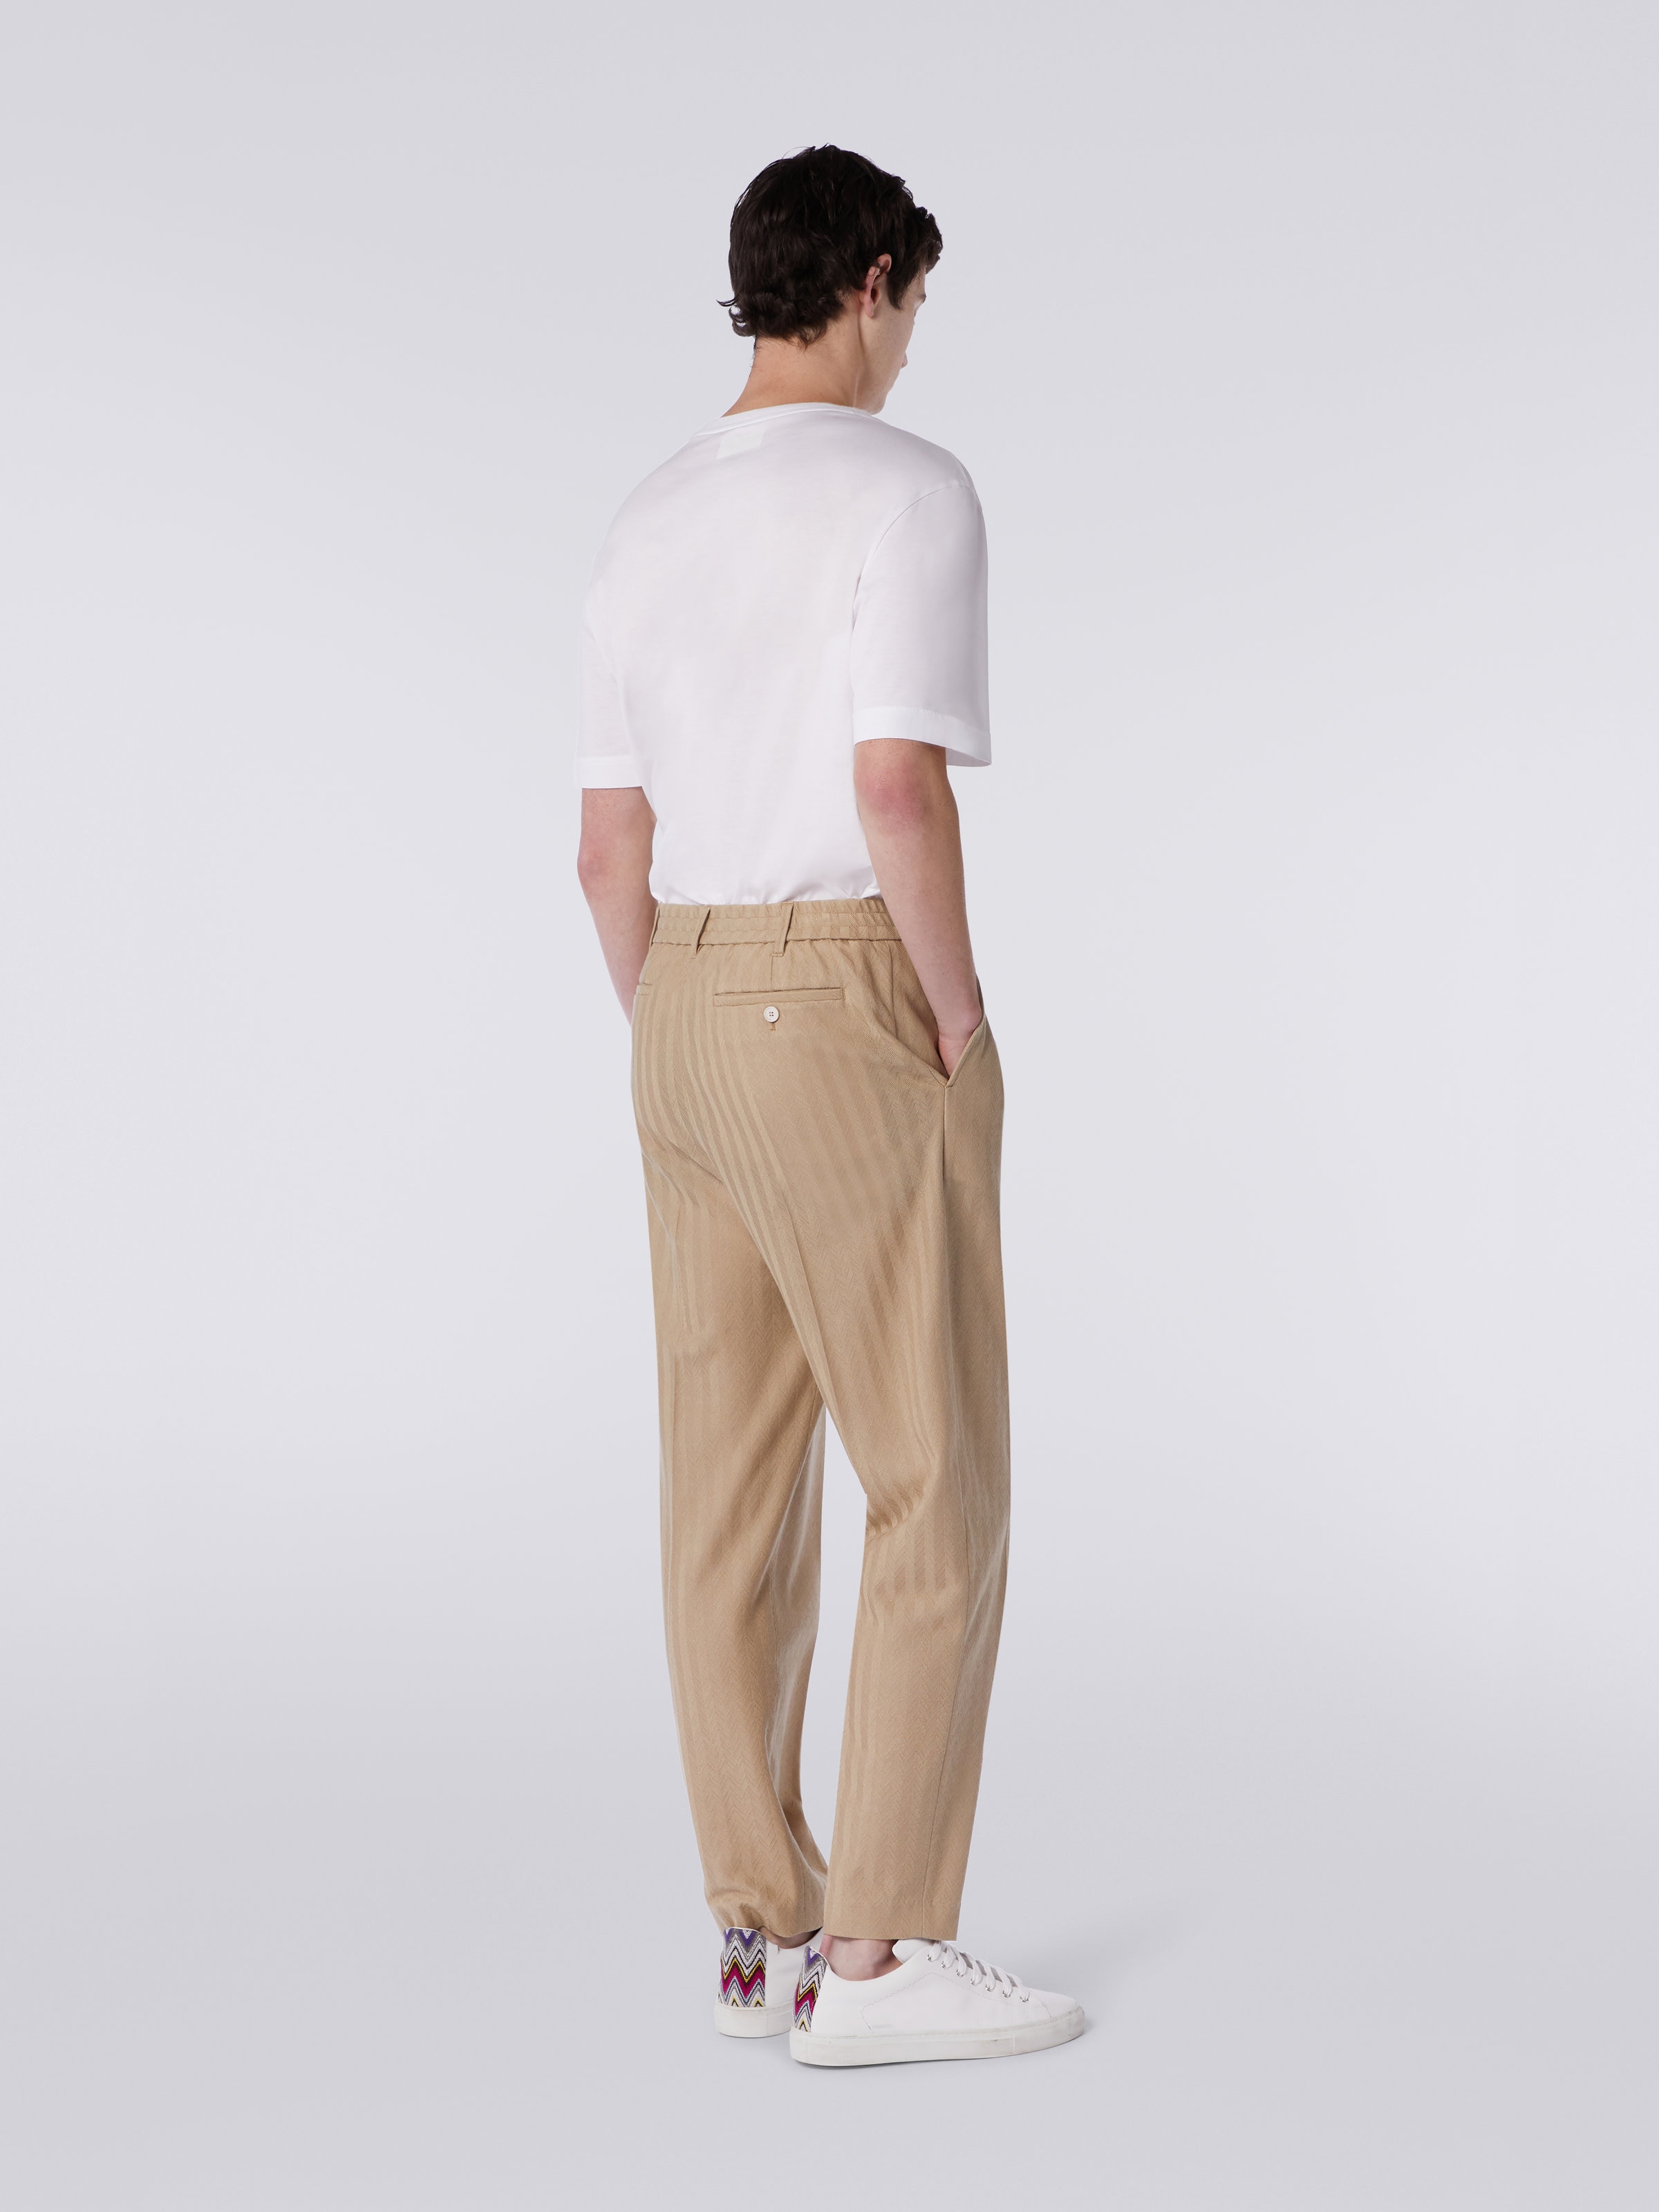 Viscose and cotton chevron trousers with ironed crease, White  - 3